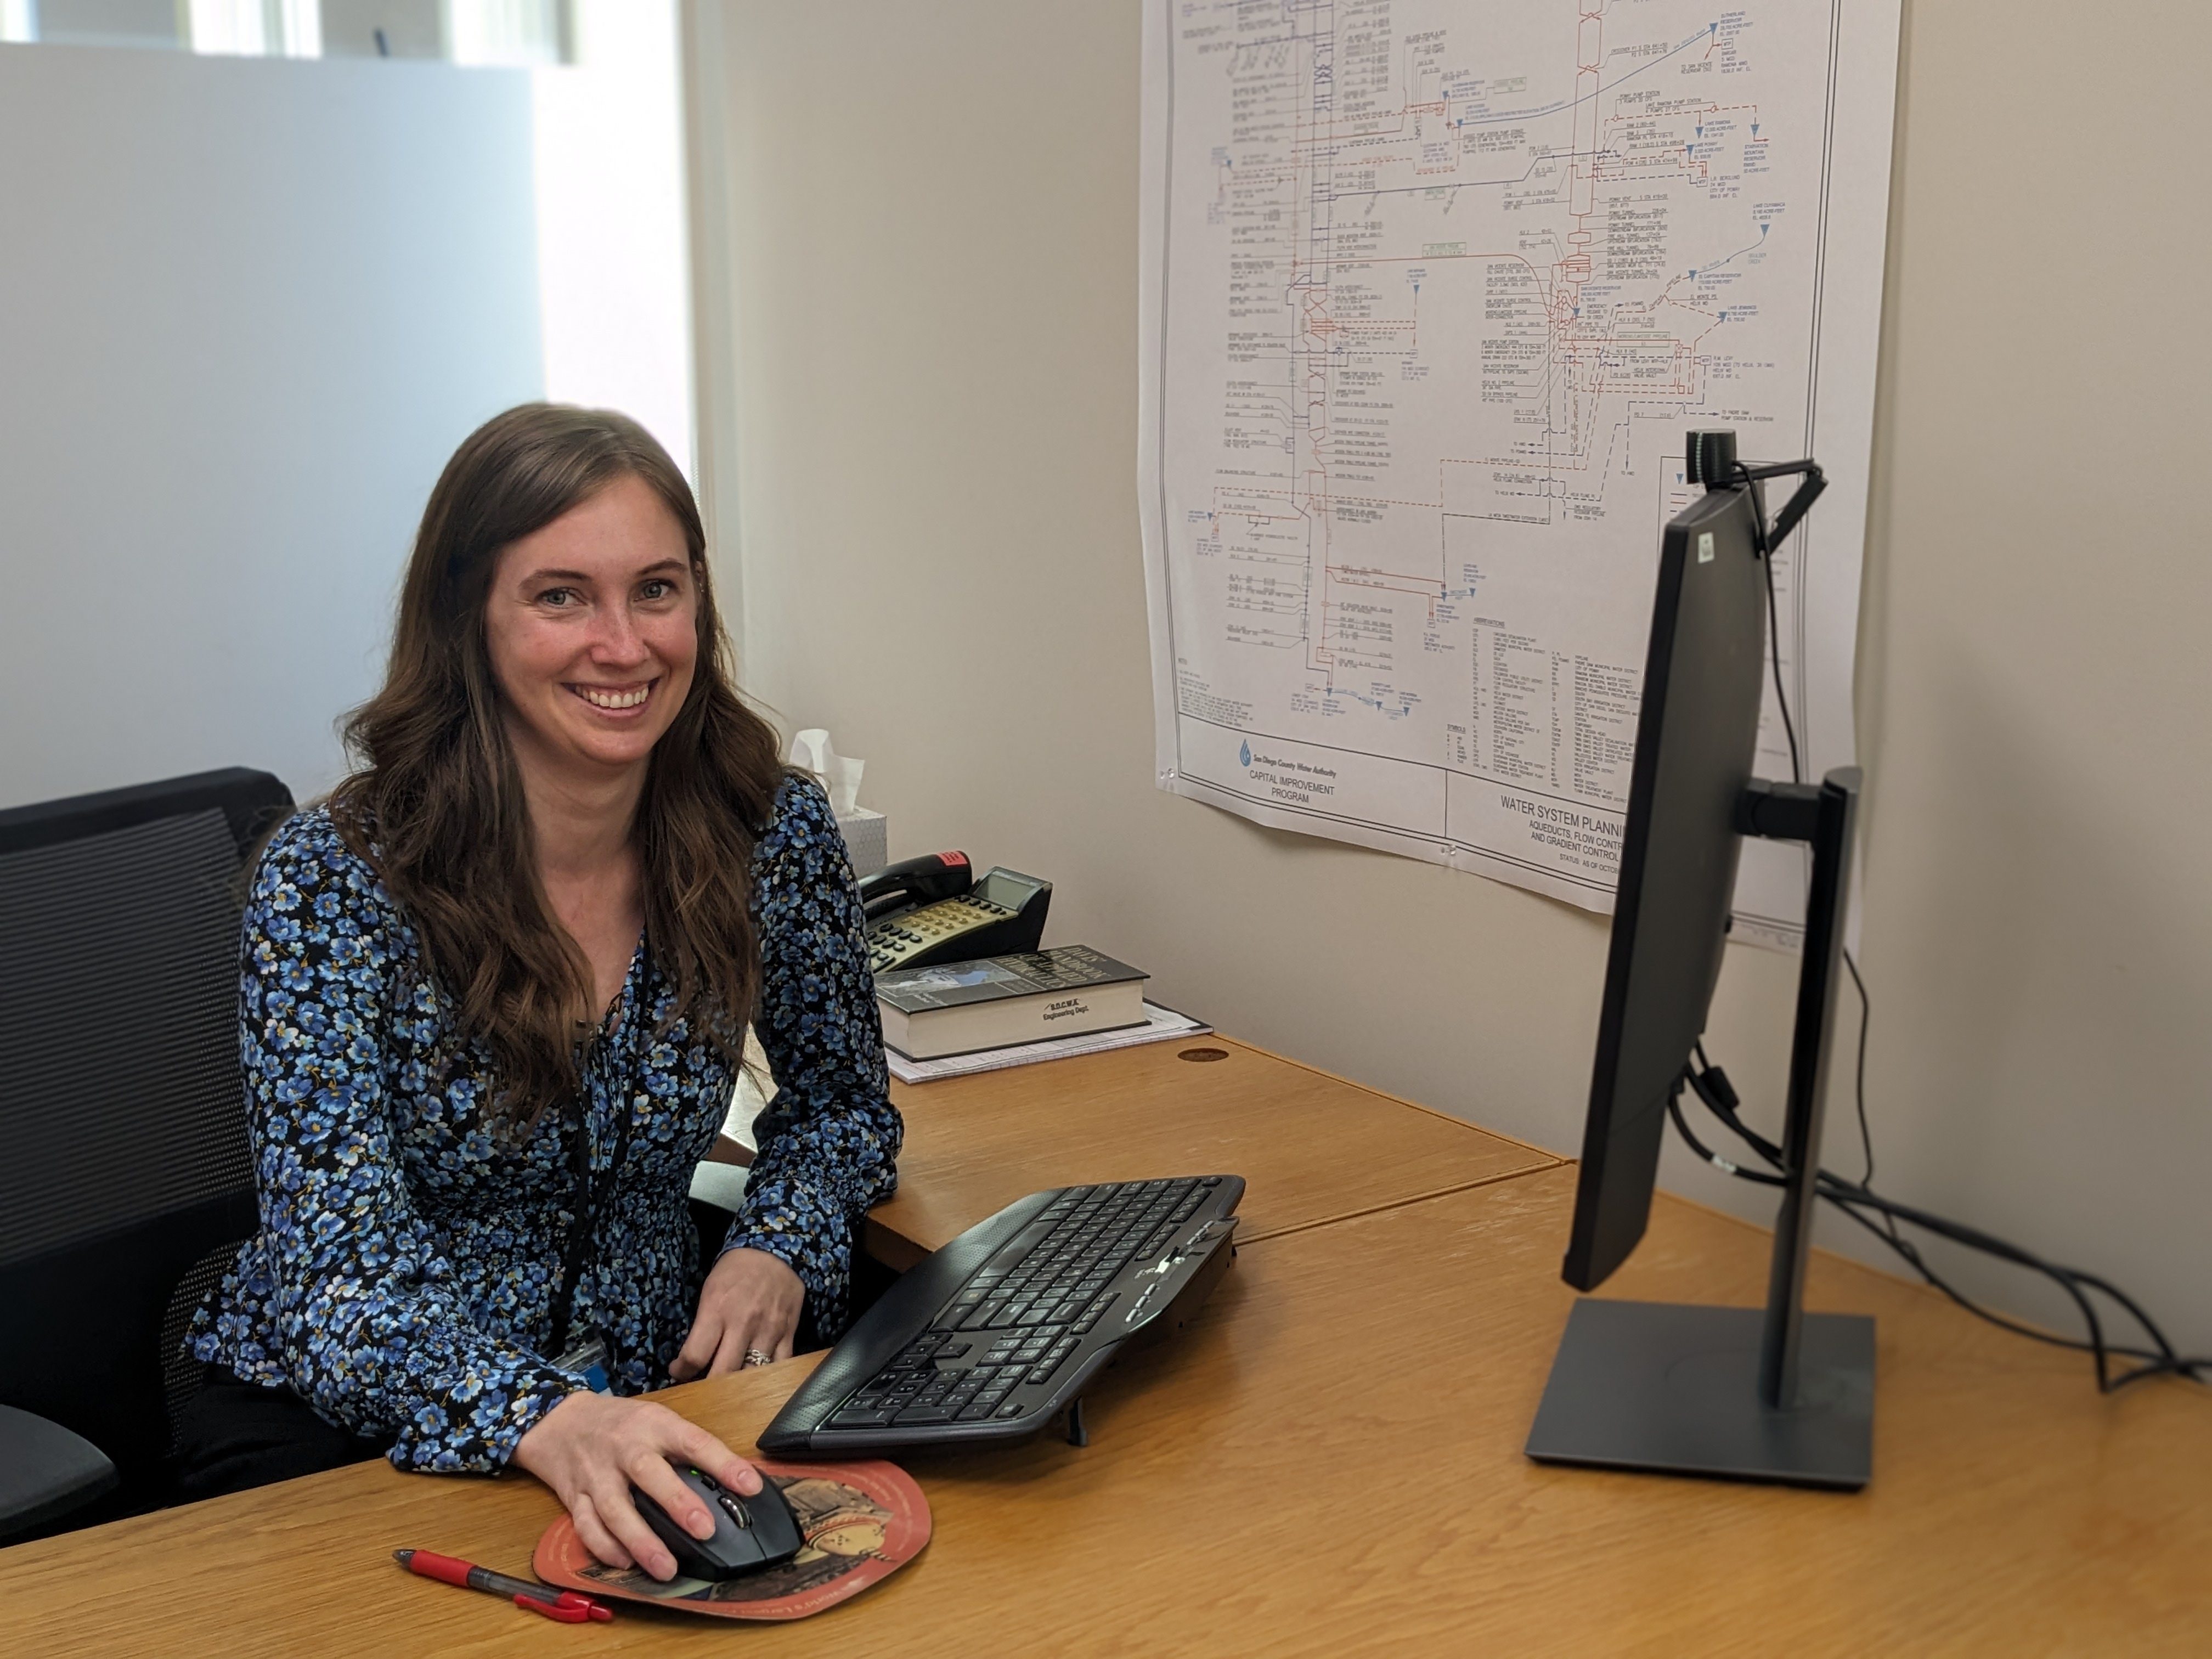 Emily Troike, EIT, is an Engineer I in the Engineering Department at the San Diego County Water Authority. National Engineers Week